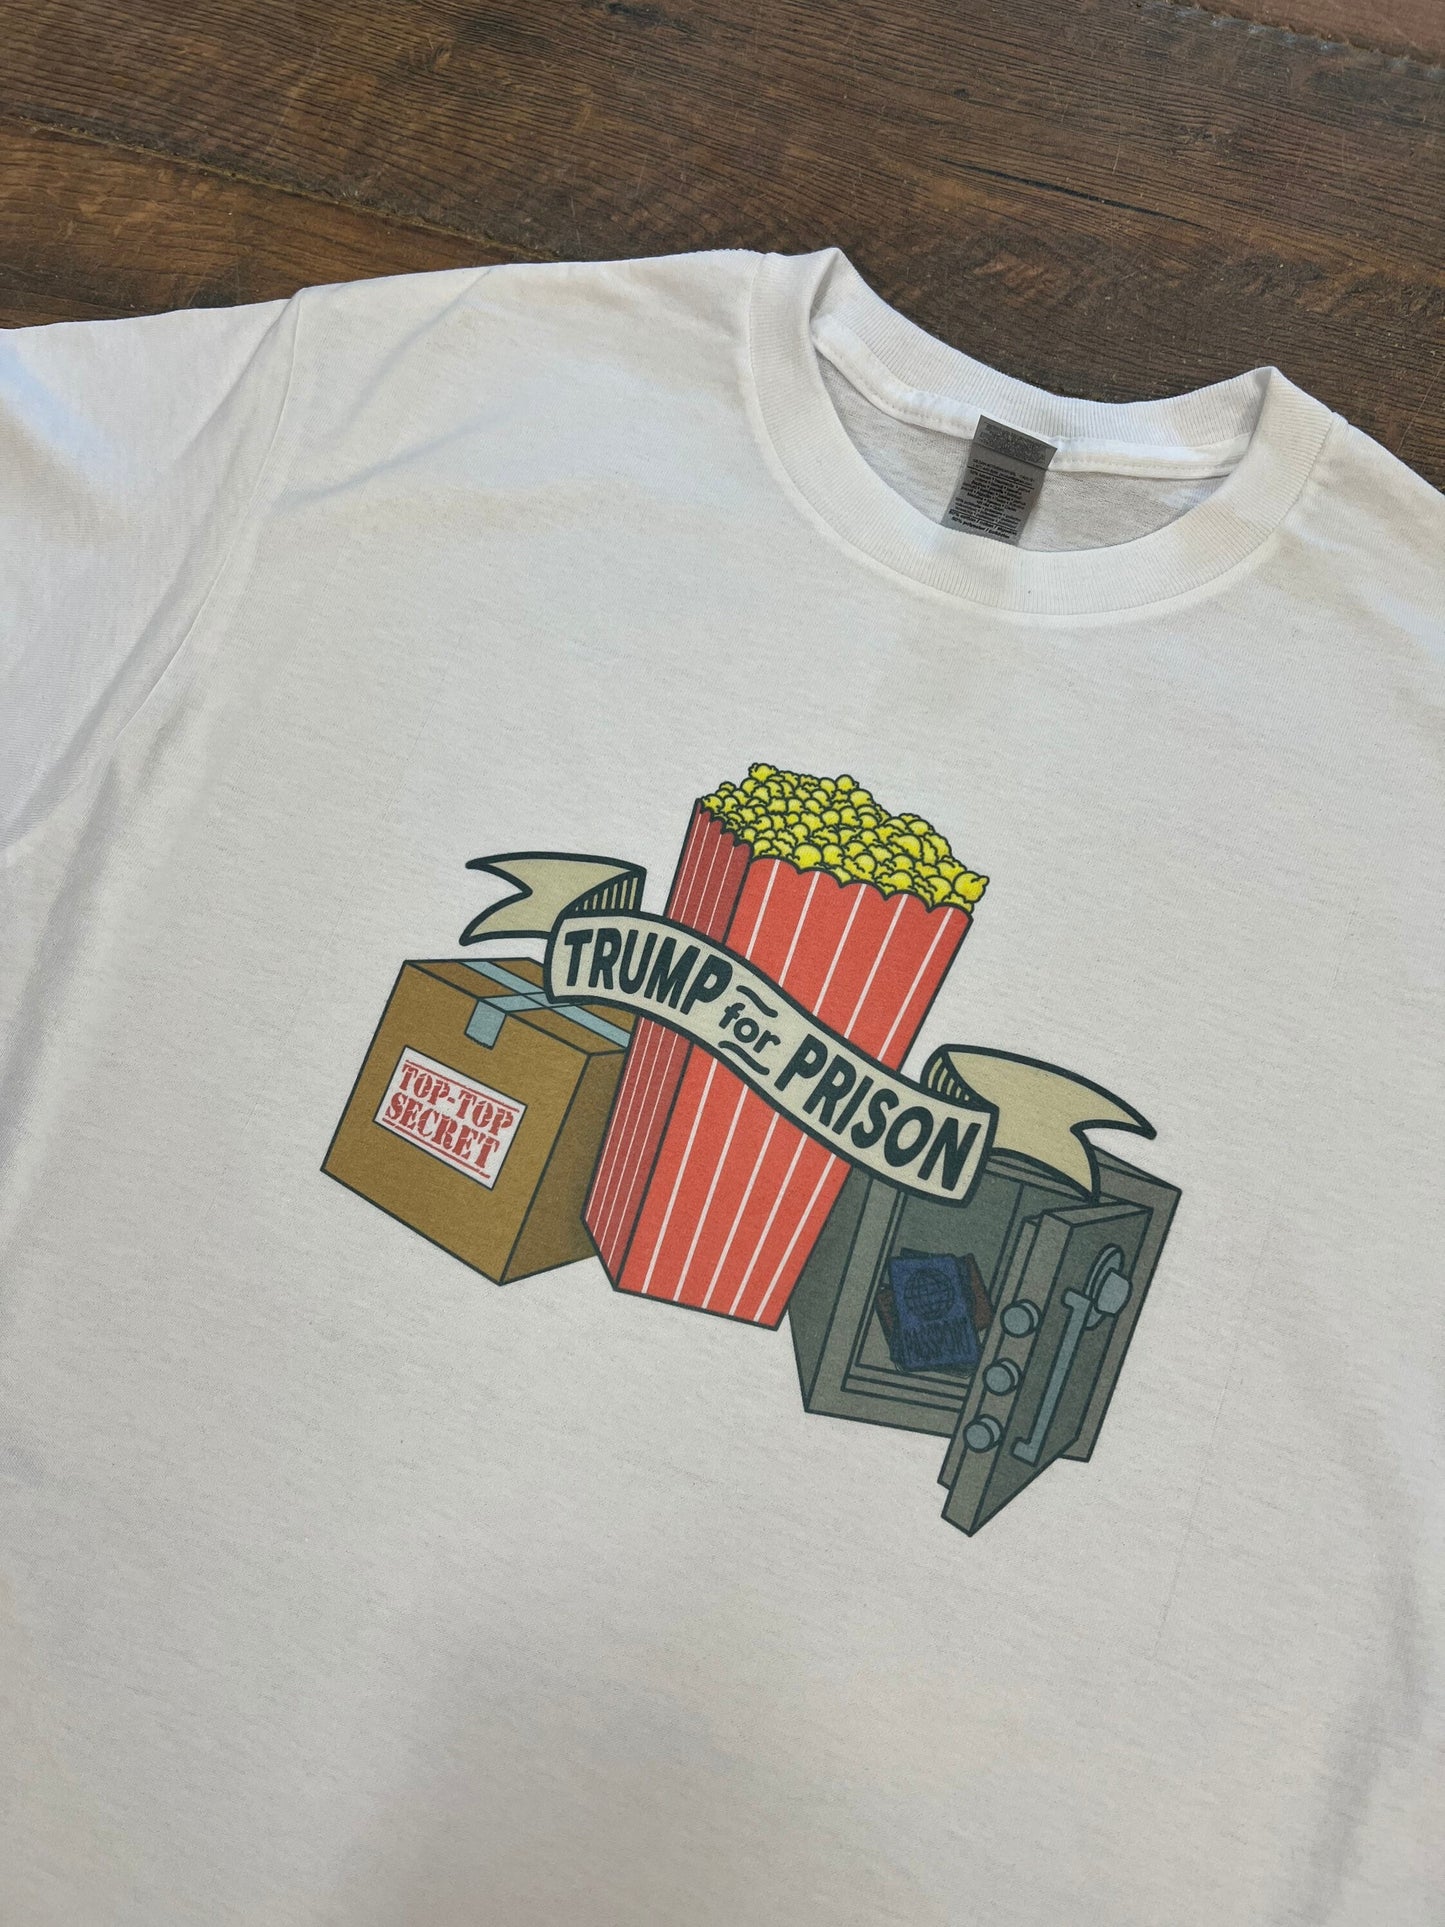 Popcorn T Shirt - trump for prison - but her emails - and more options!